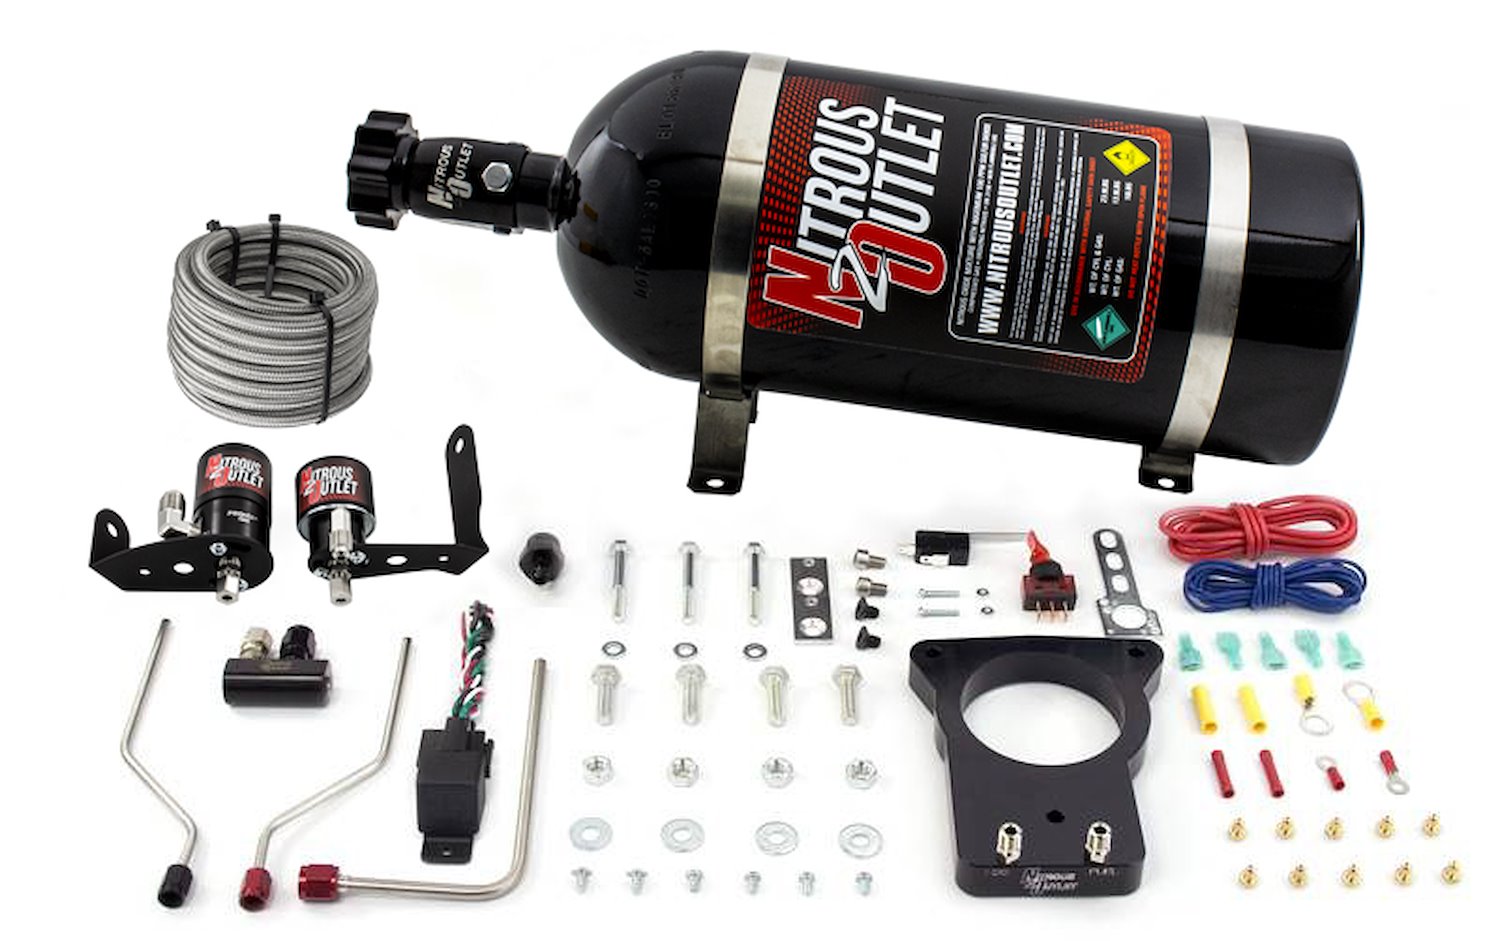 00-10126-78-12 Cadillac 78 mm 2004-2005 CTS-V Hard-Line Plate System, Gas/E85, 5-55psi, 50-200HP, 12lb Bottle